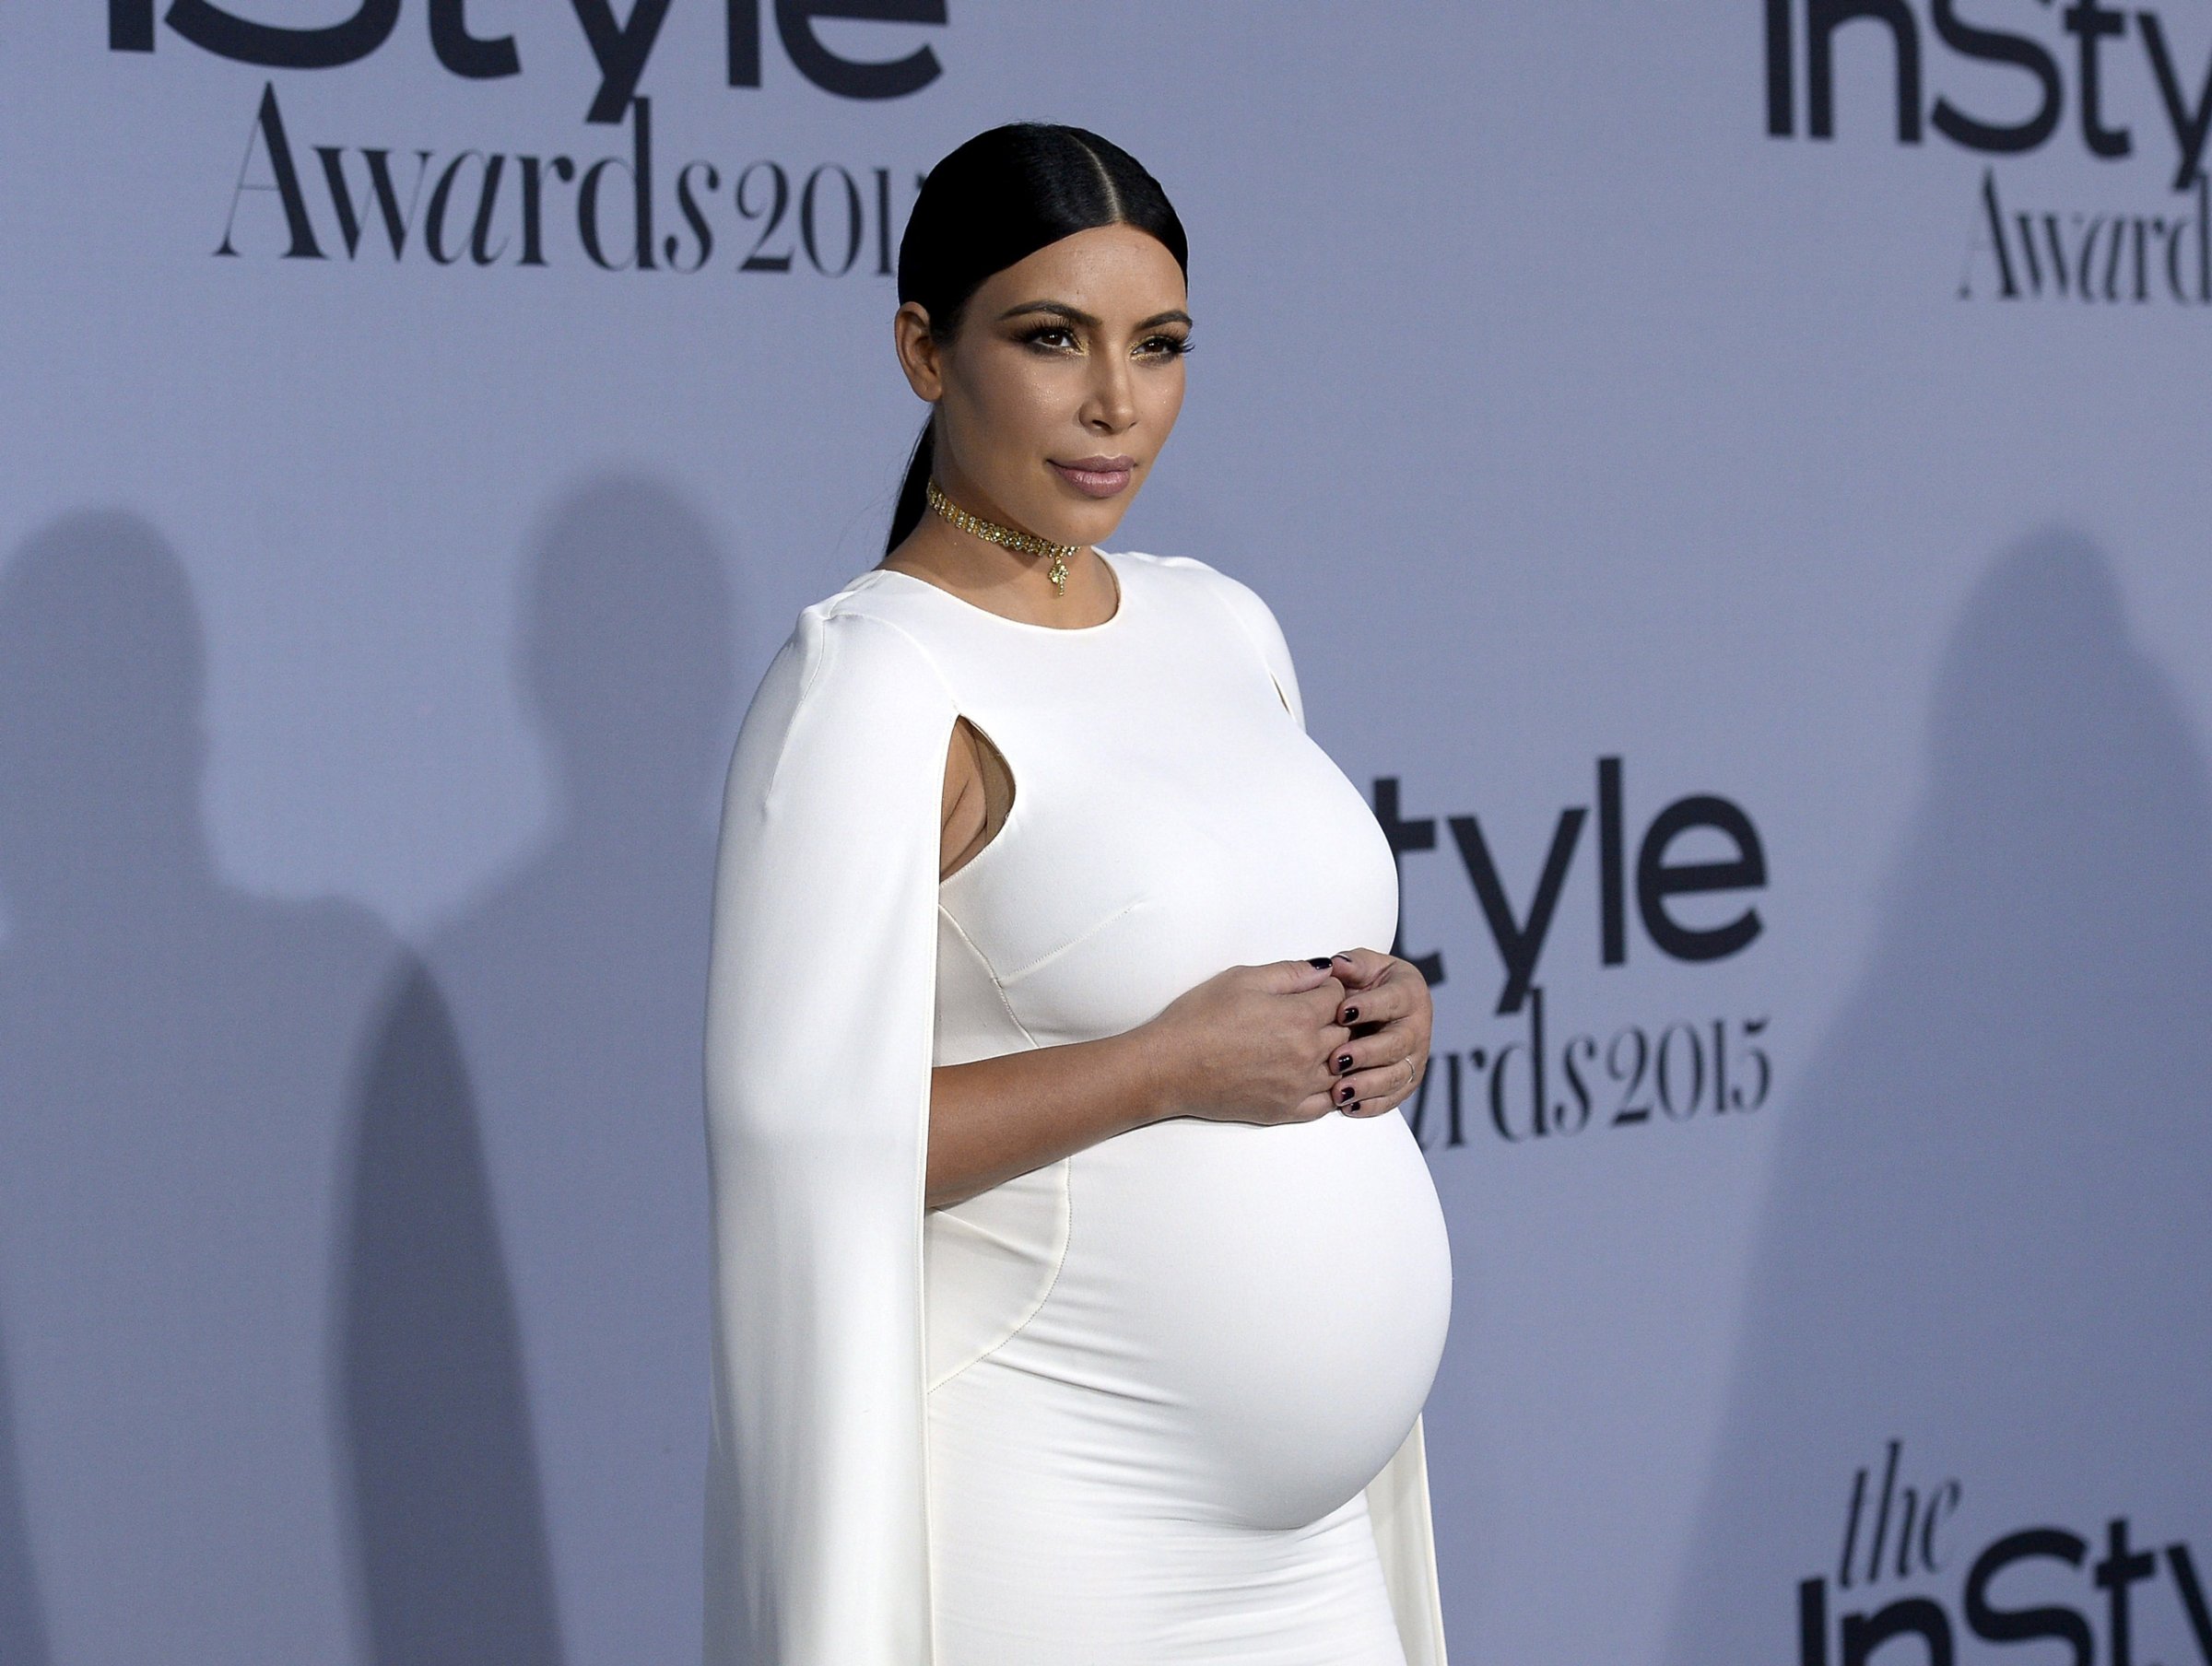 Kim Kardashian-West poses during the InStyle Awards at the Getty Center in Los Angeles